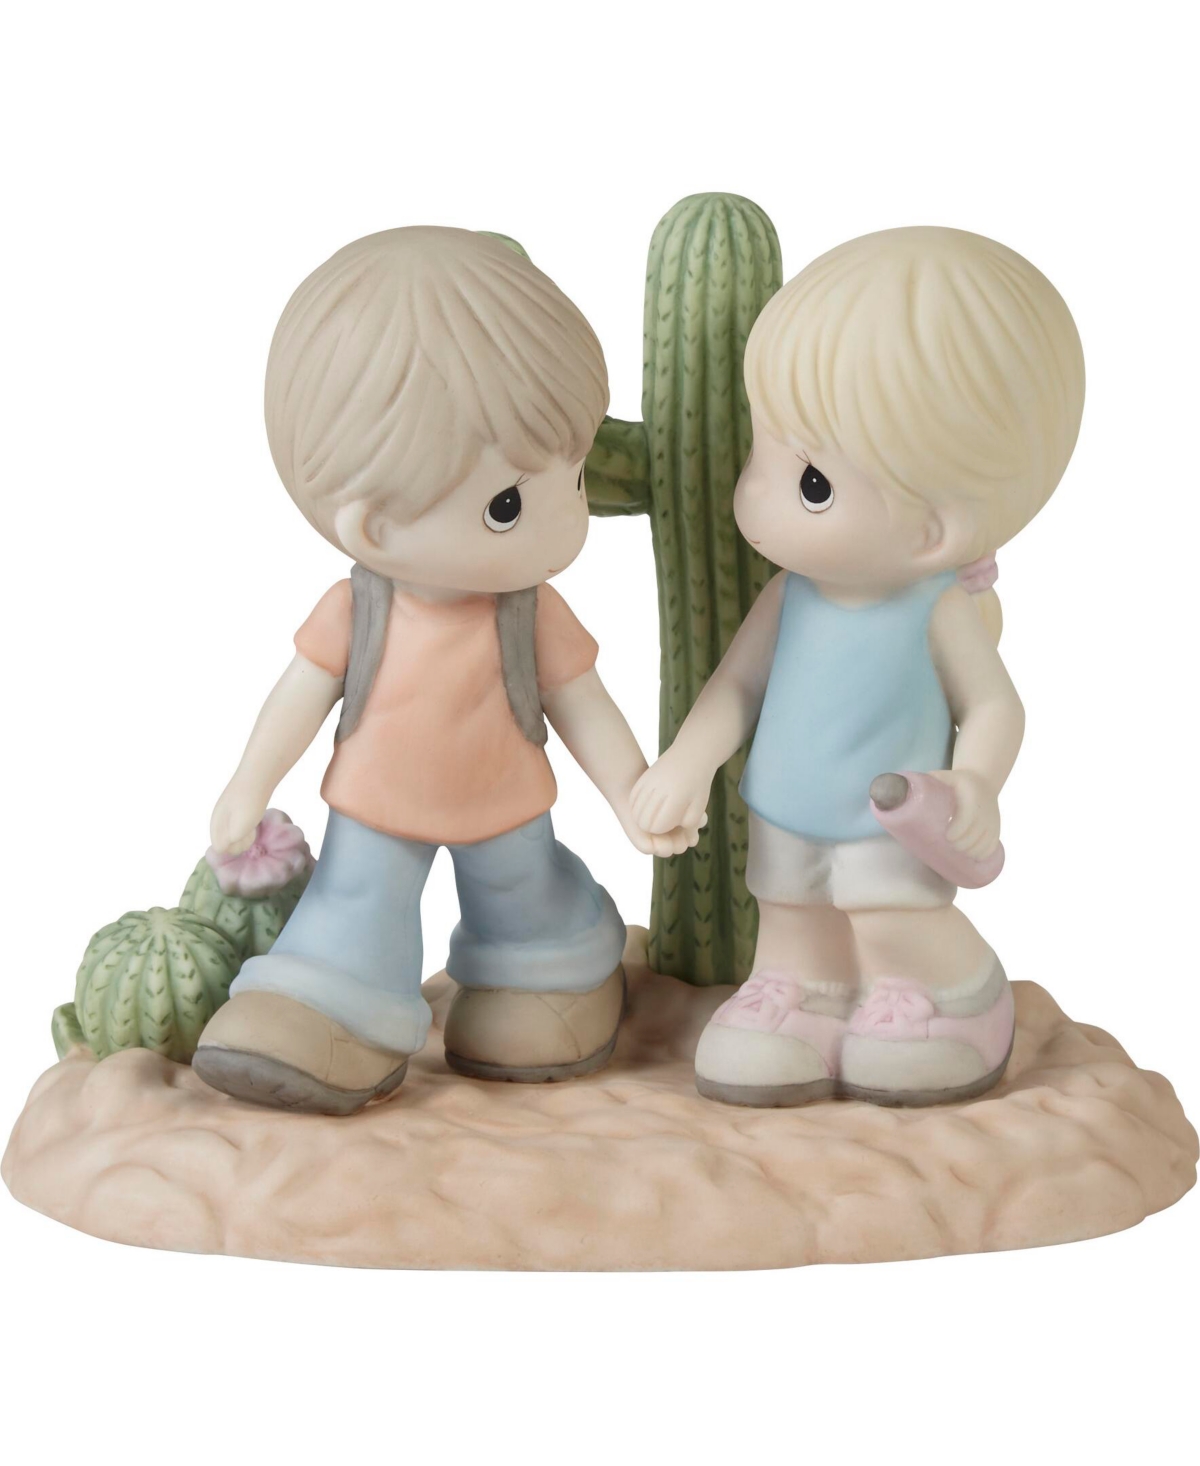 Precious Moments I'm Stuck On You Bisque Porcelain Figurine In Multicolored